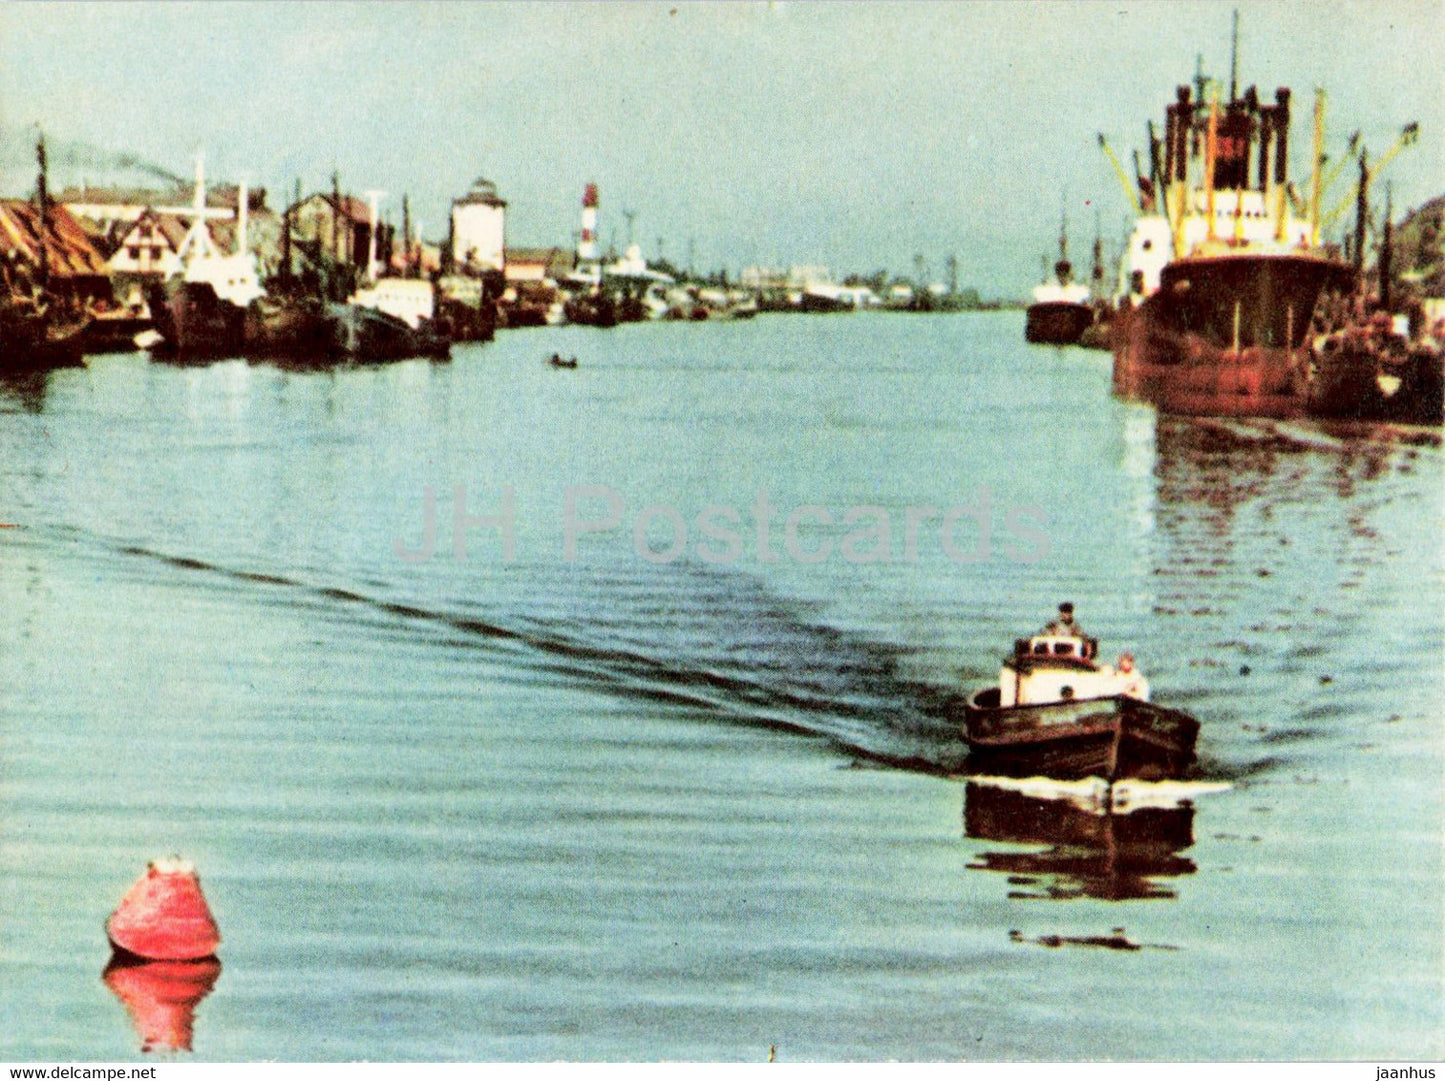 Liepaja - Canal of the Port - ship - boat - 1963 - Latvia USSR - unused - JH Postcards